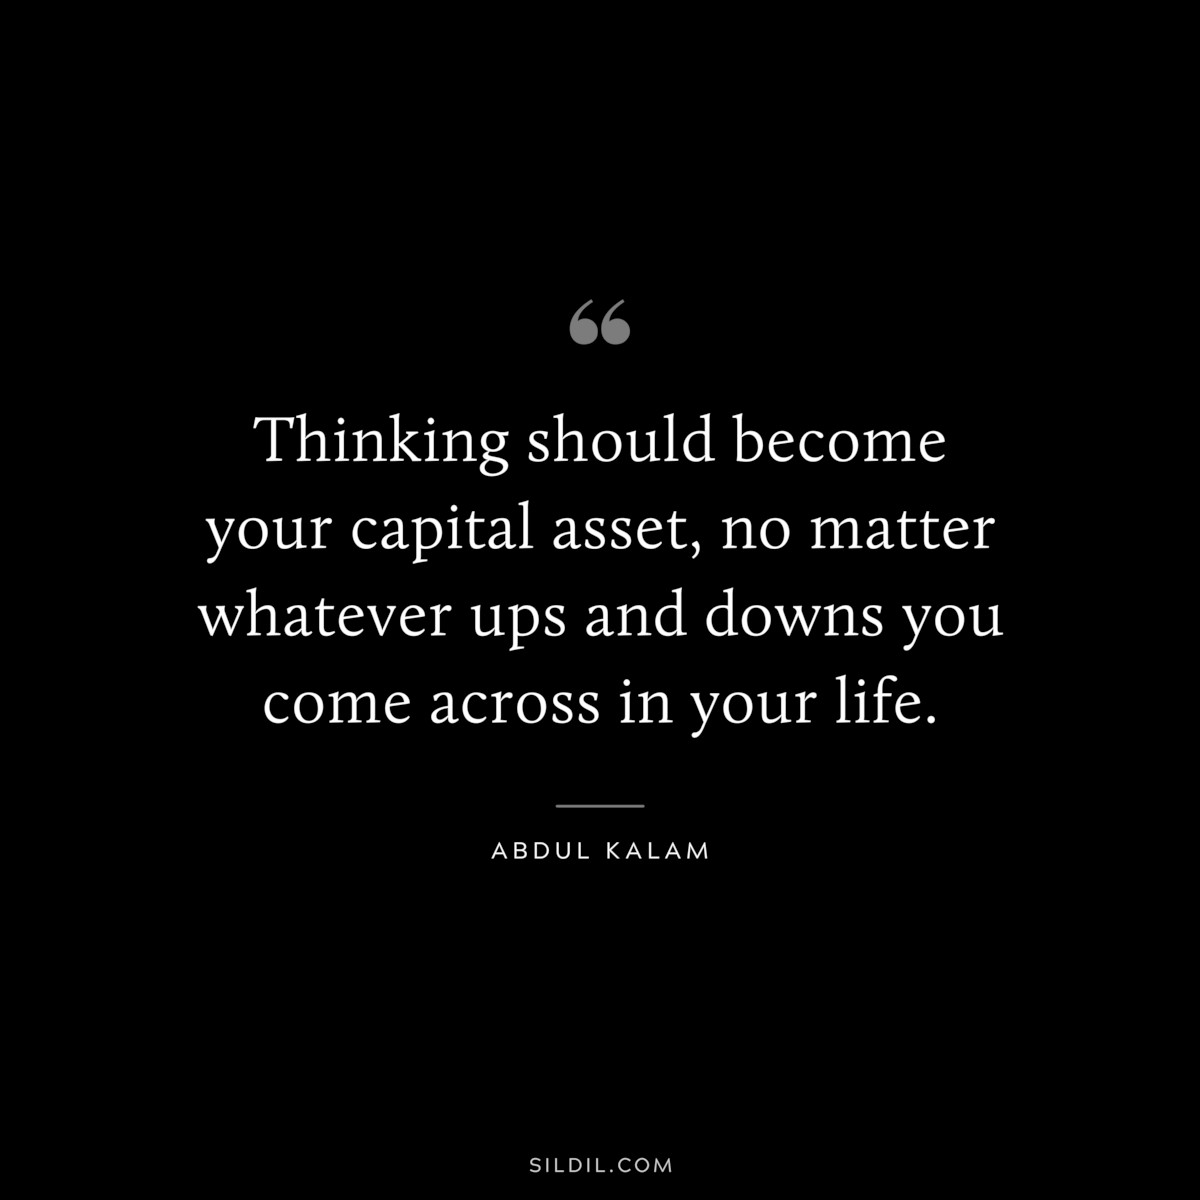 Thinking should become your capital asset, no matter whatever ups and downs you come across in your life. ― Abdul Kalam